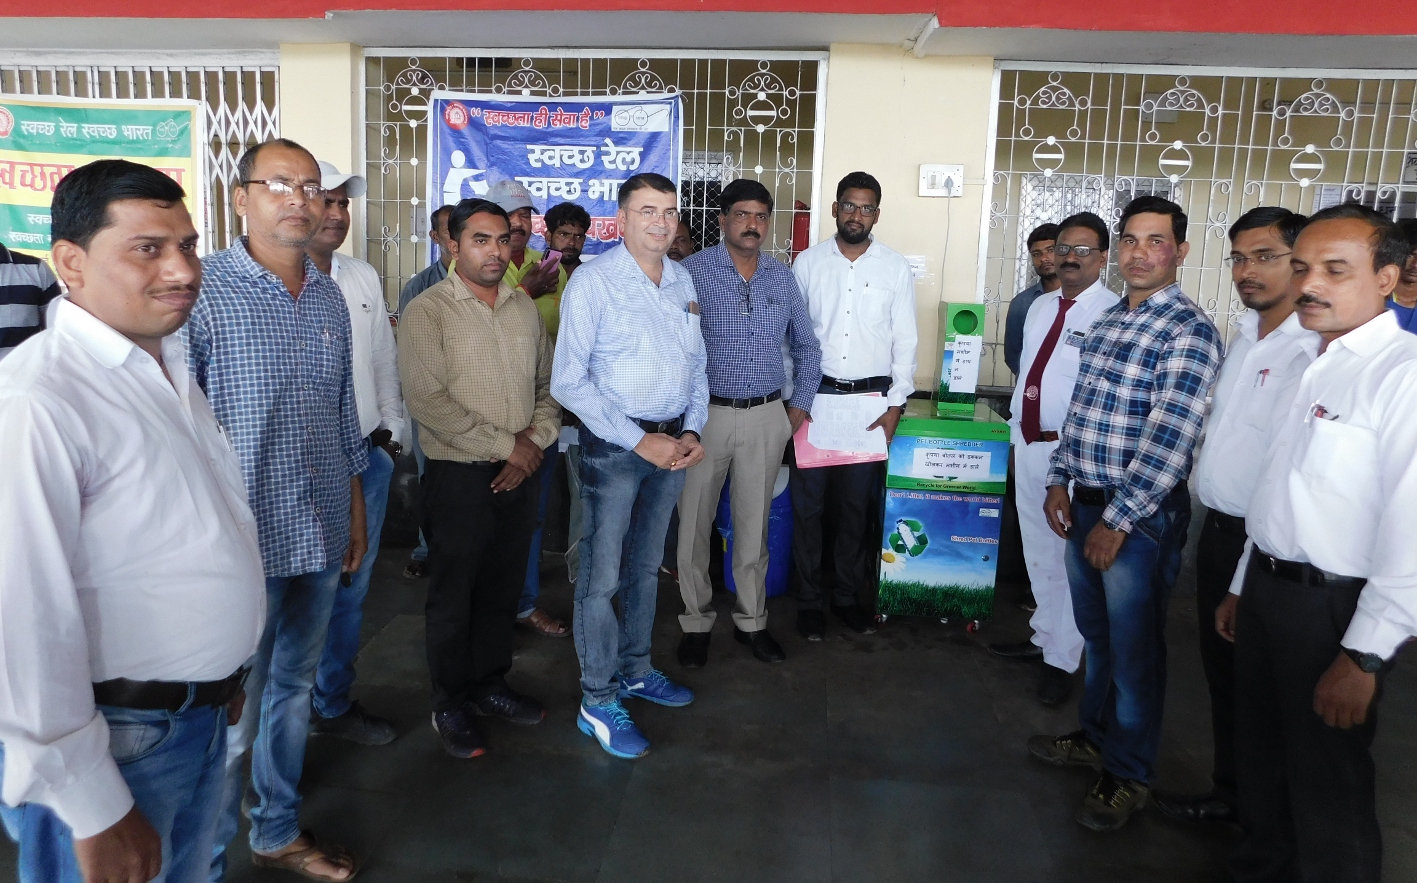 Bottle Cressor Machine Launched at Railway Station